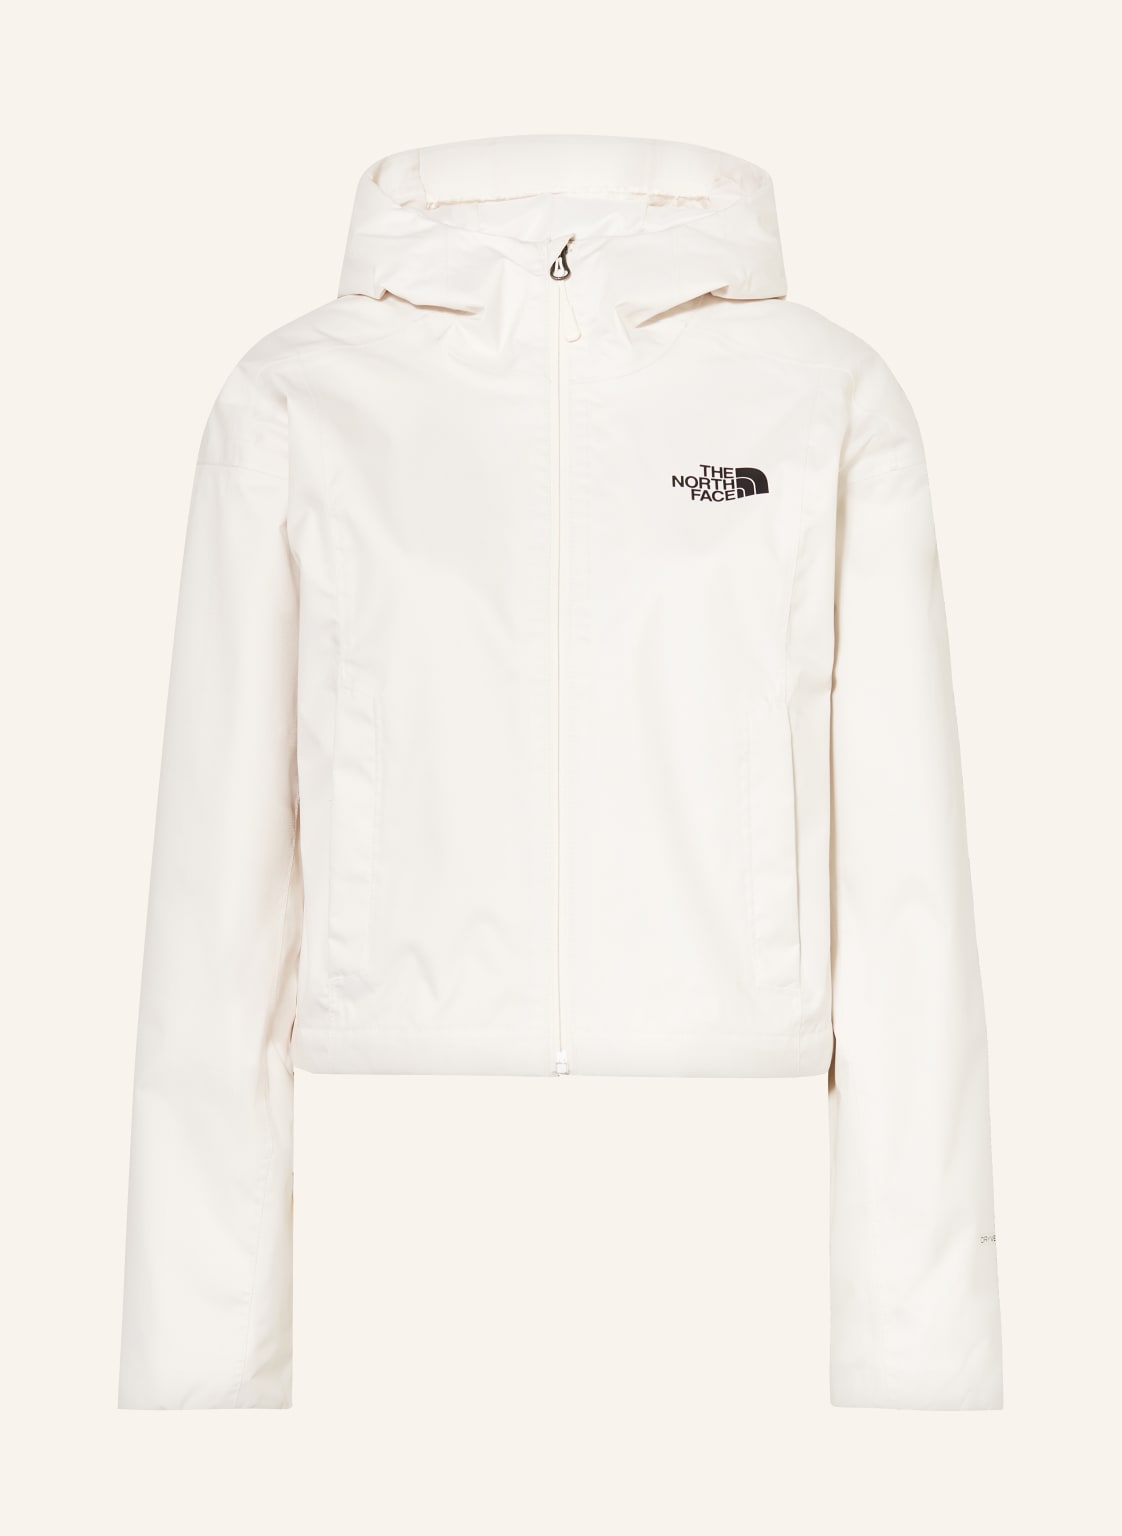 The North Face Funktionsjacke Quest weiss von The North Face